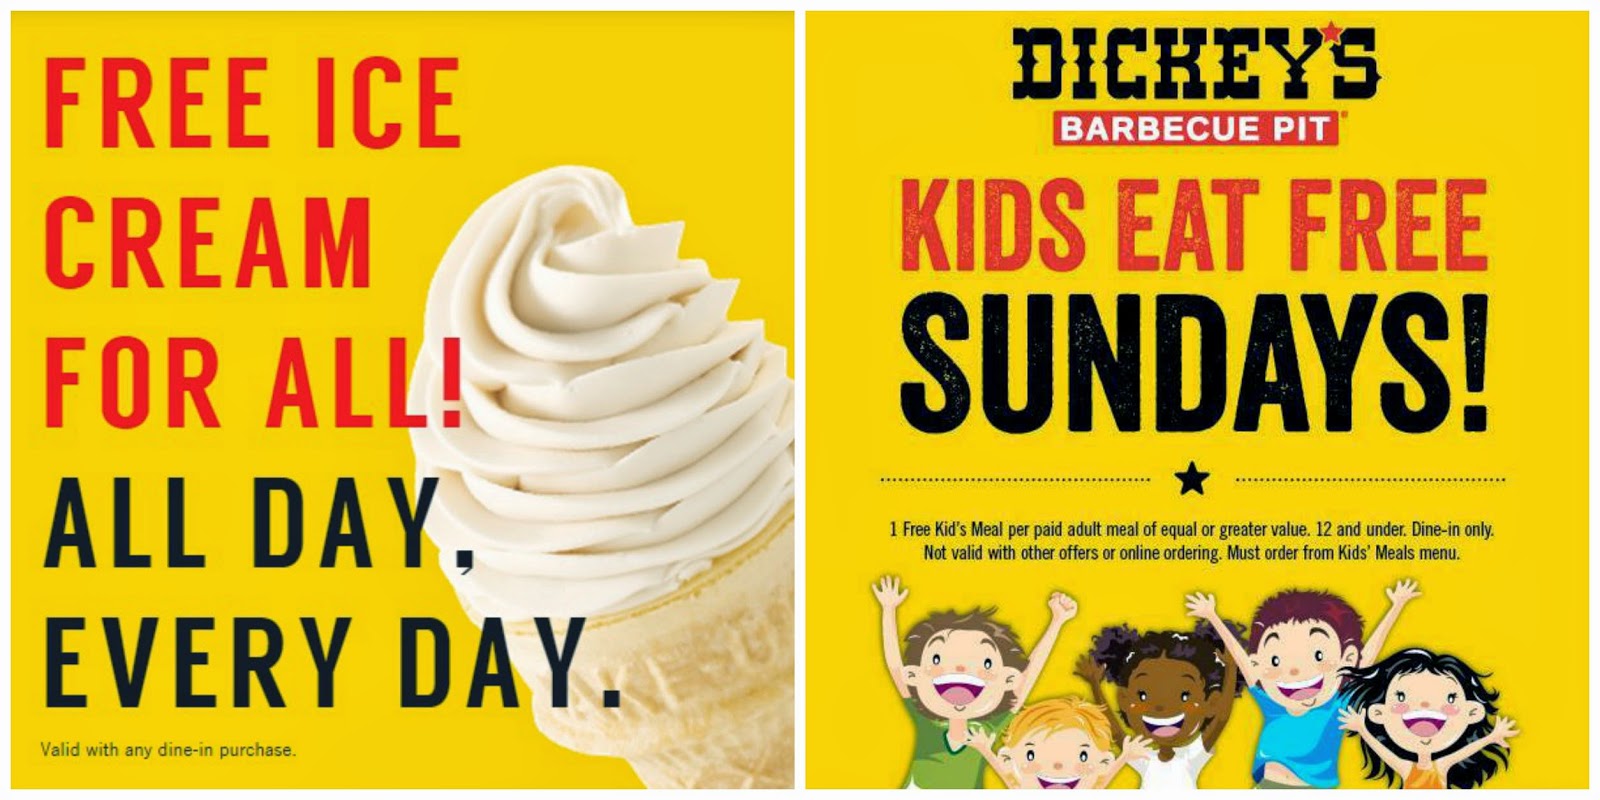 coupon, discount, review, restaurant, BBQ, fast casual, Detroit, Ferndale, Big Yellow Cup club, kids eat free, free, free ice cream, Dickey's